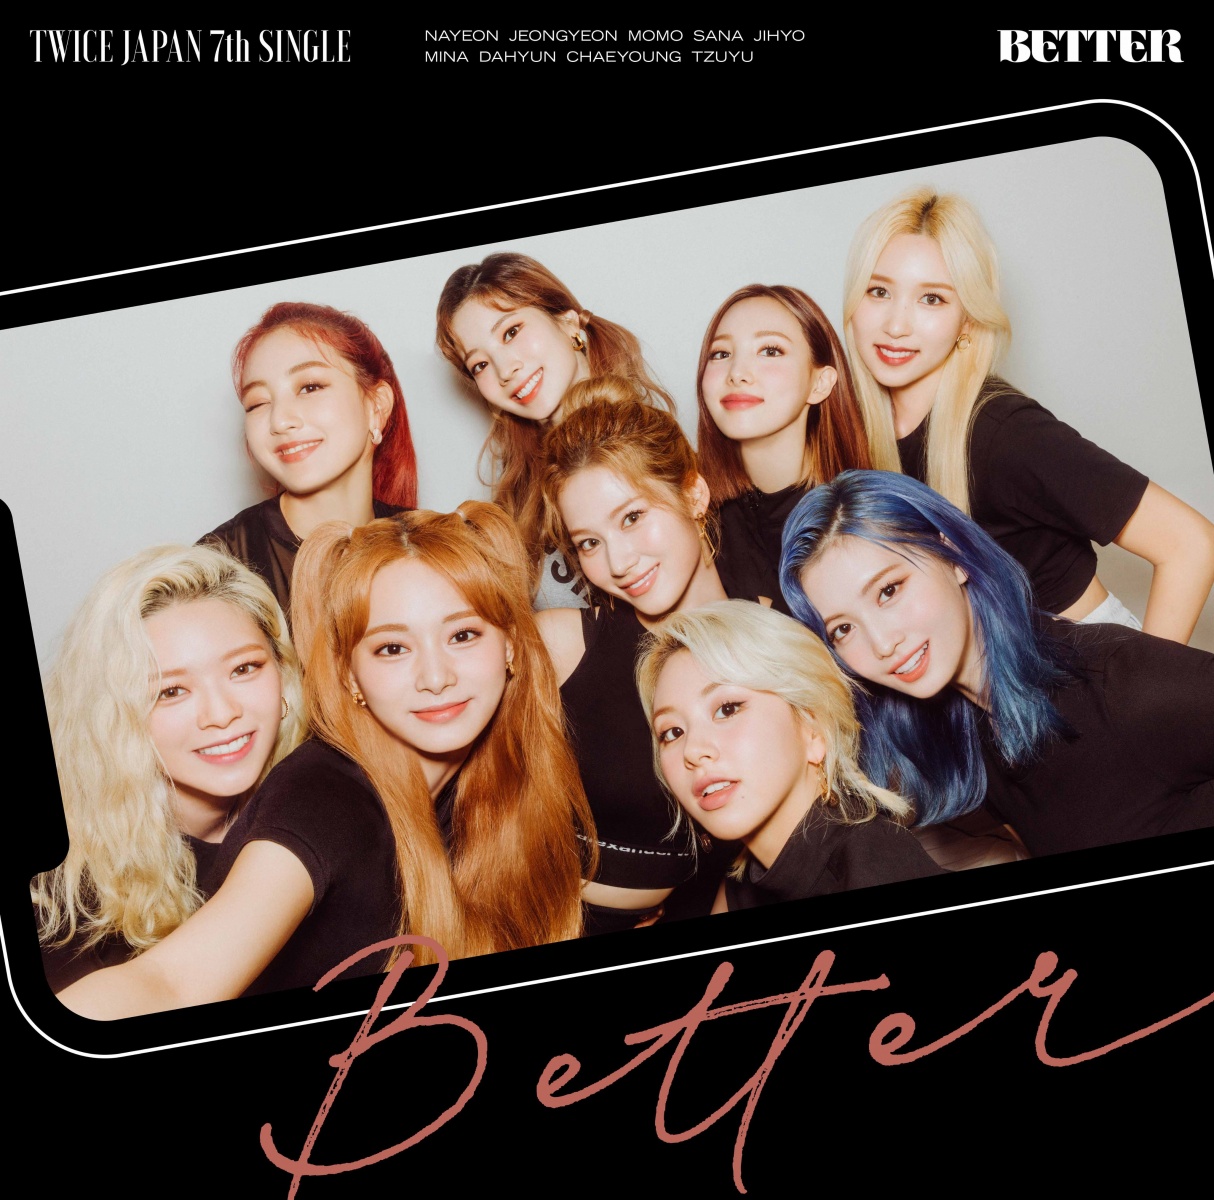 TWICE releases Japanese single 'BETTER' on November 18th, Jacket image released